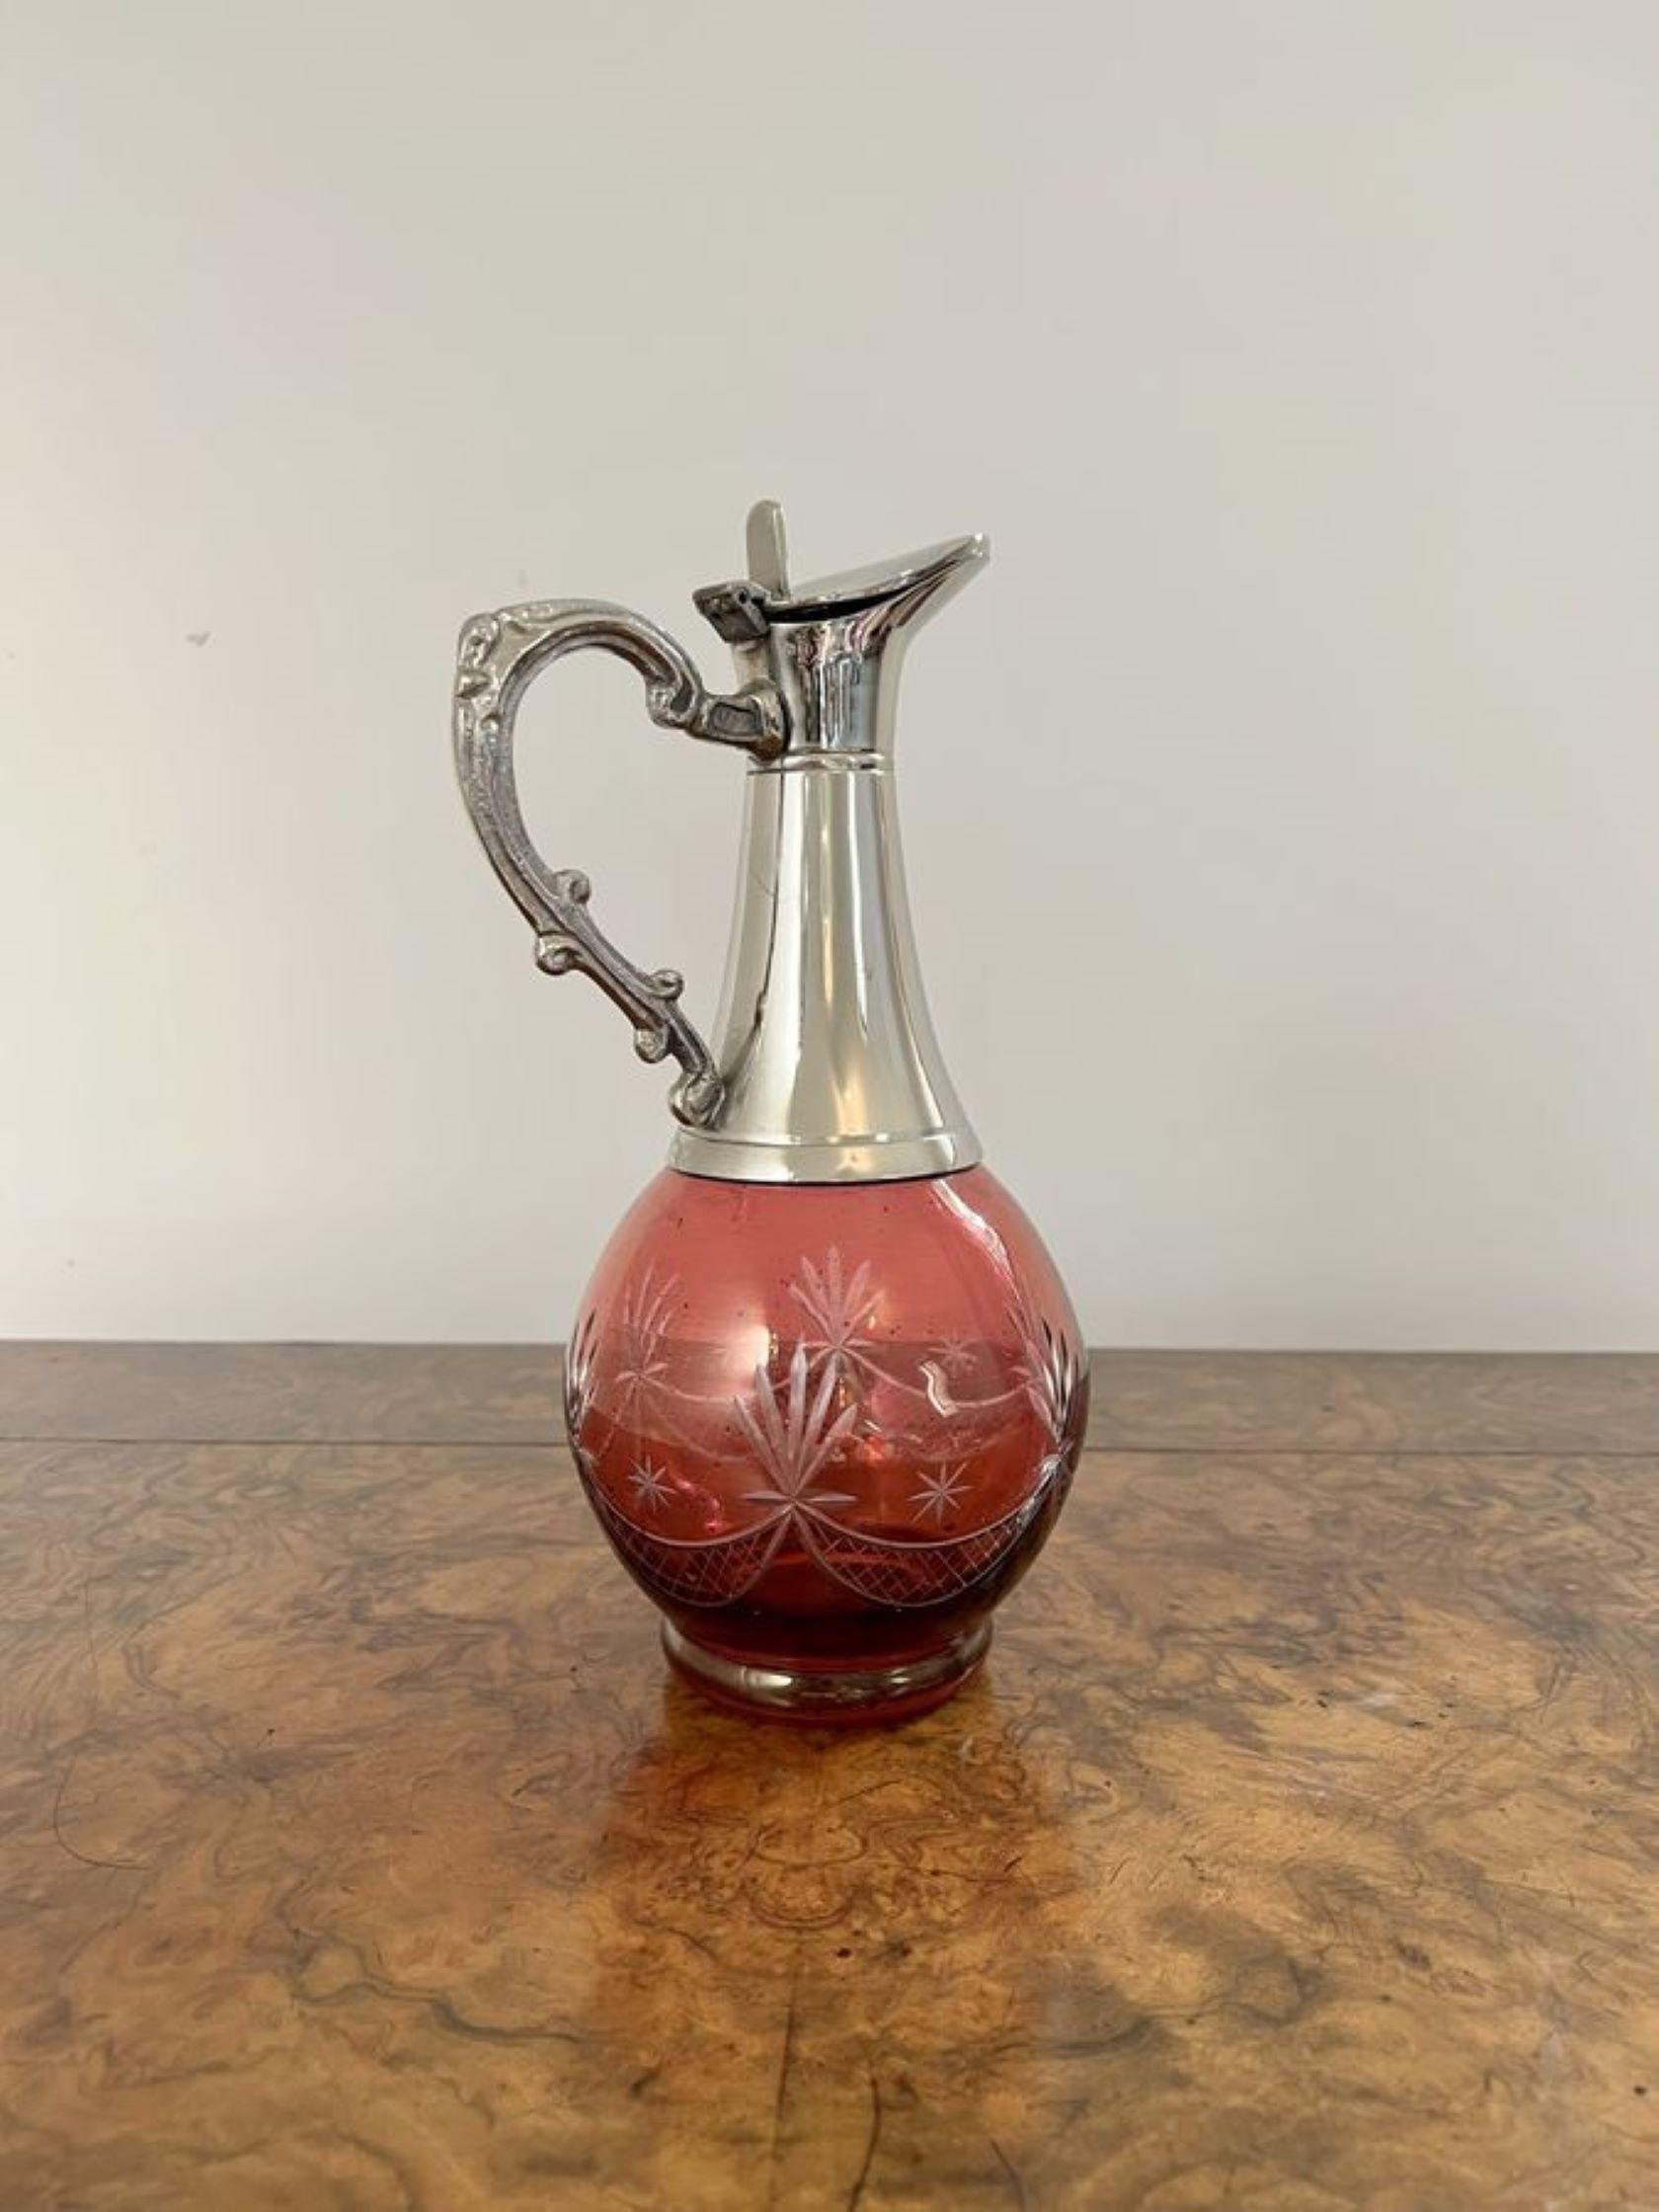 Quality antique Edwardian cranberry glass wine decanter having a wonderful cranberry glass decanter etched with stars with a silver plated neck and a quality ornate shaped handle.

D. 1910 